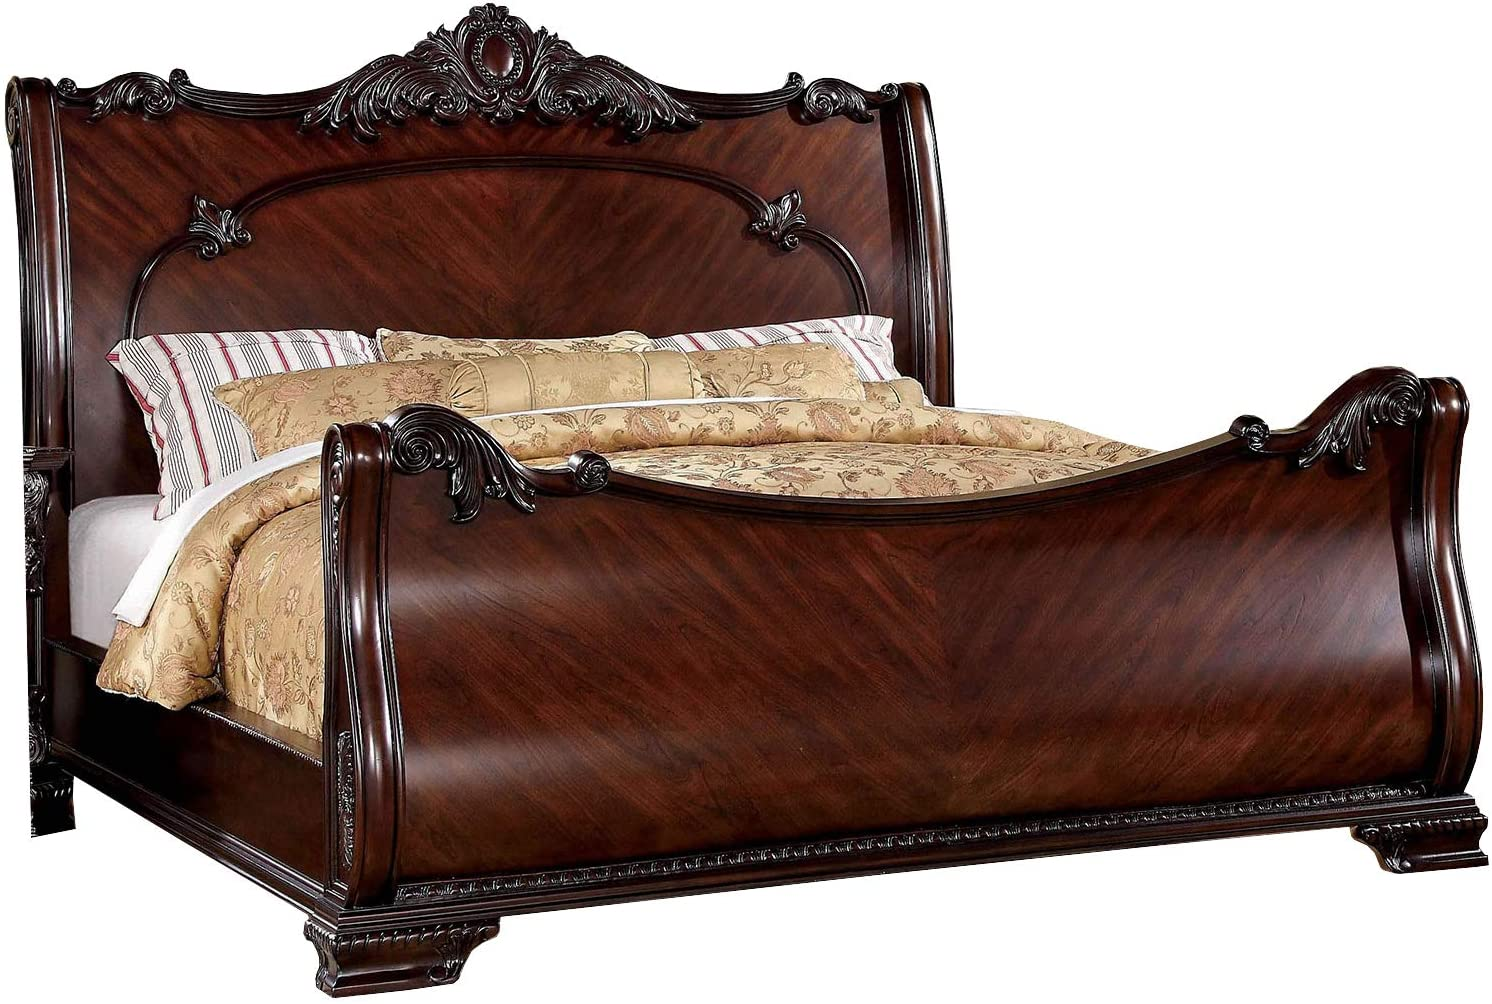 A bed with the traditional sleigh bed features